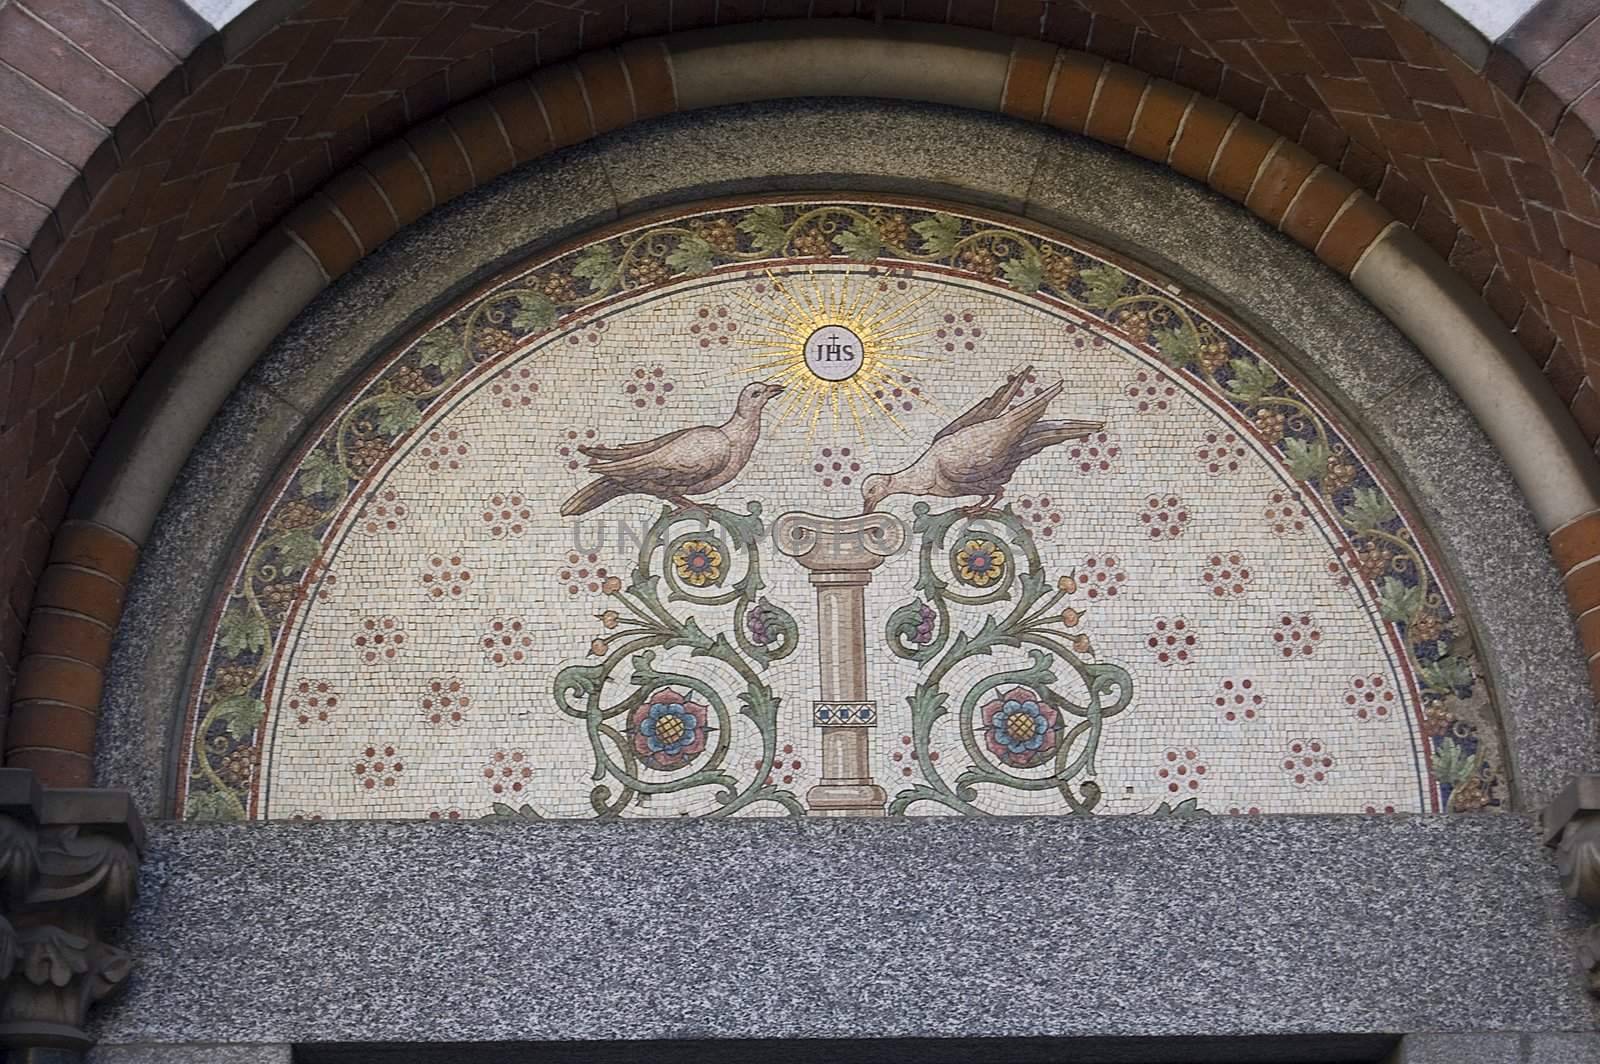 A mosaic in a arch of an old church